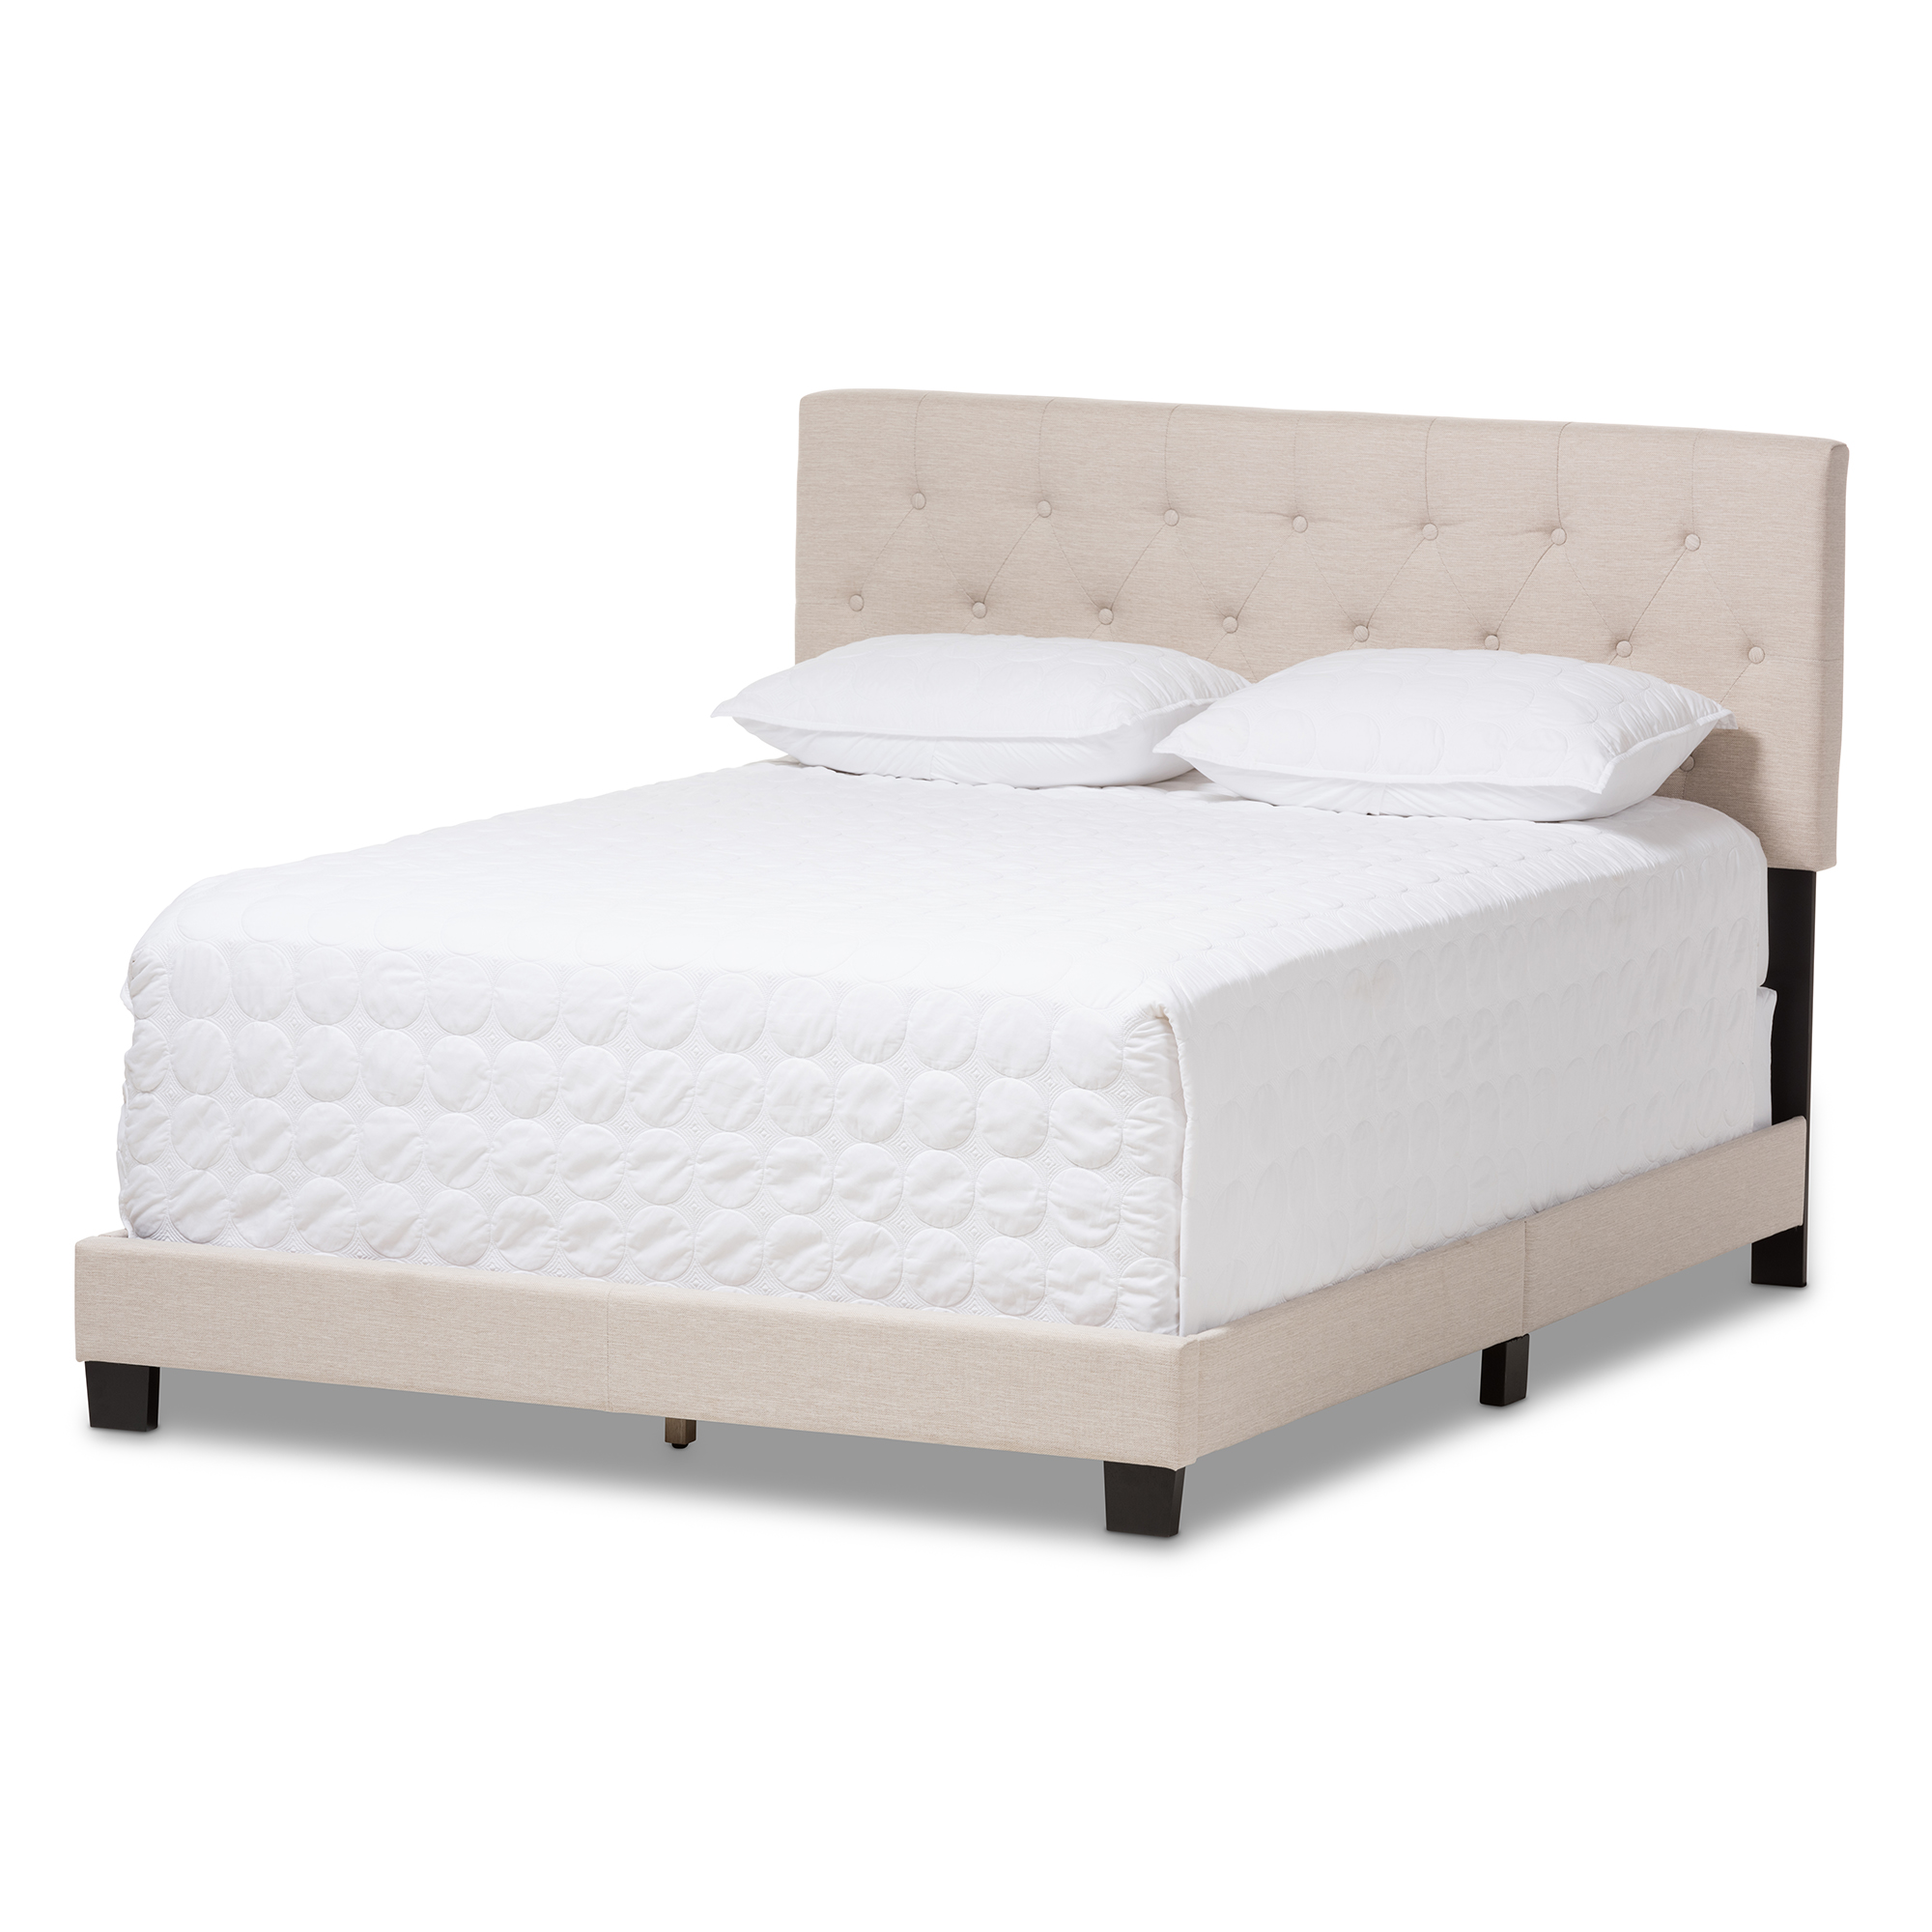 Baxton Studio Cassandra Modern and Contemporary Light Beige Fabric Upholstered King Size Bed